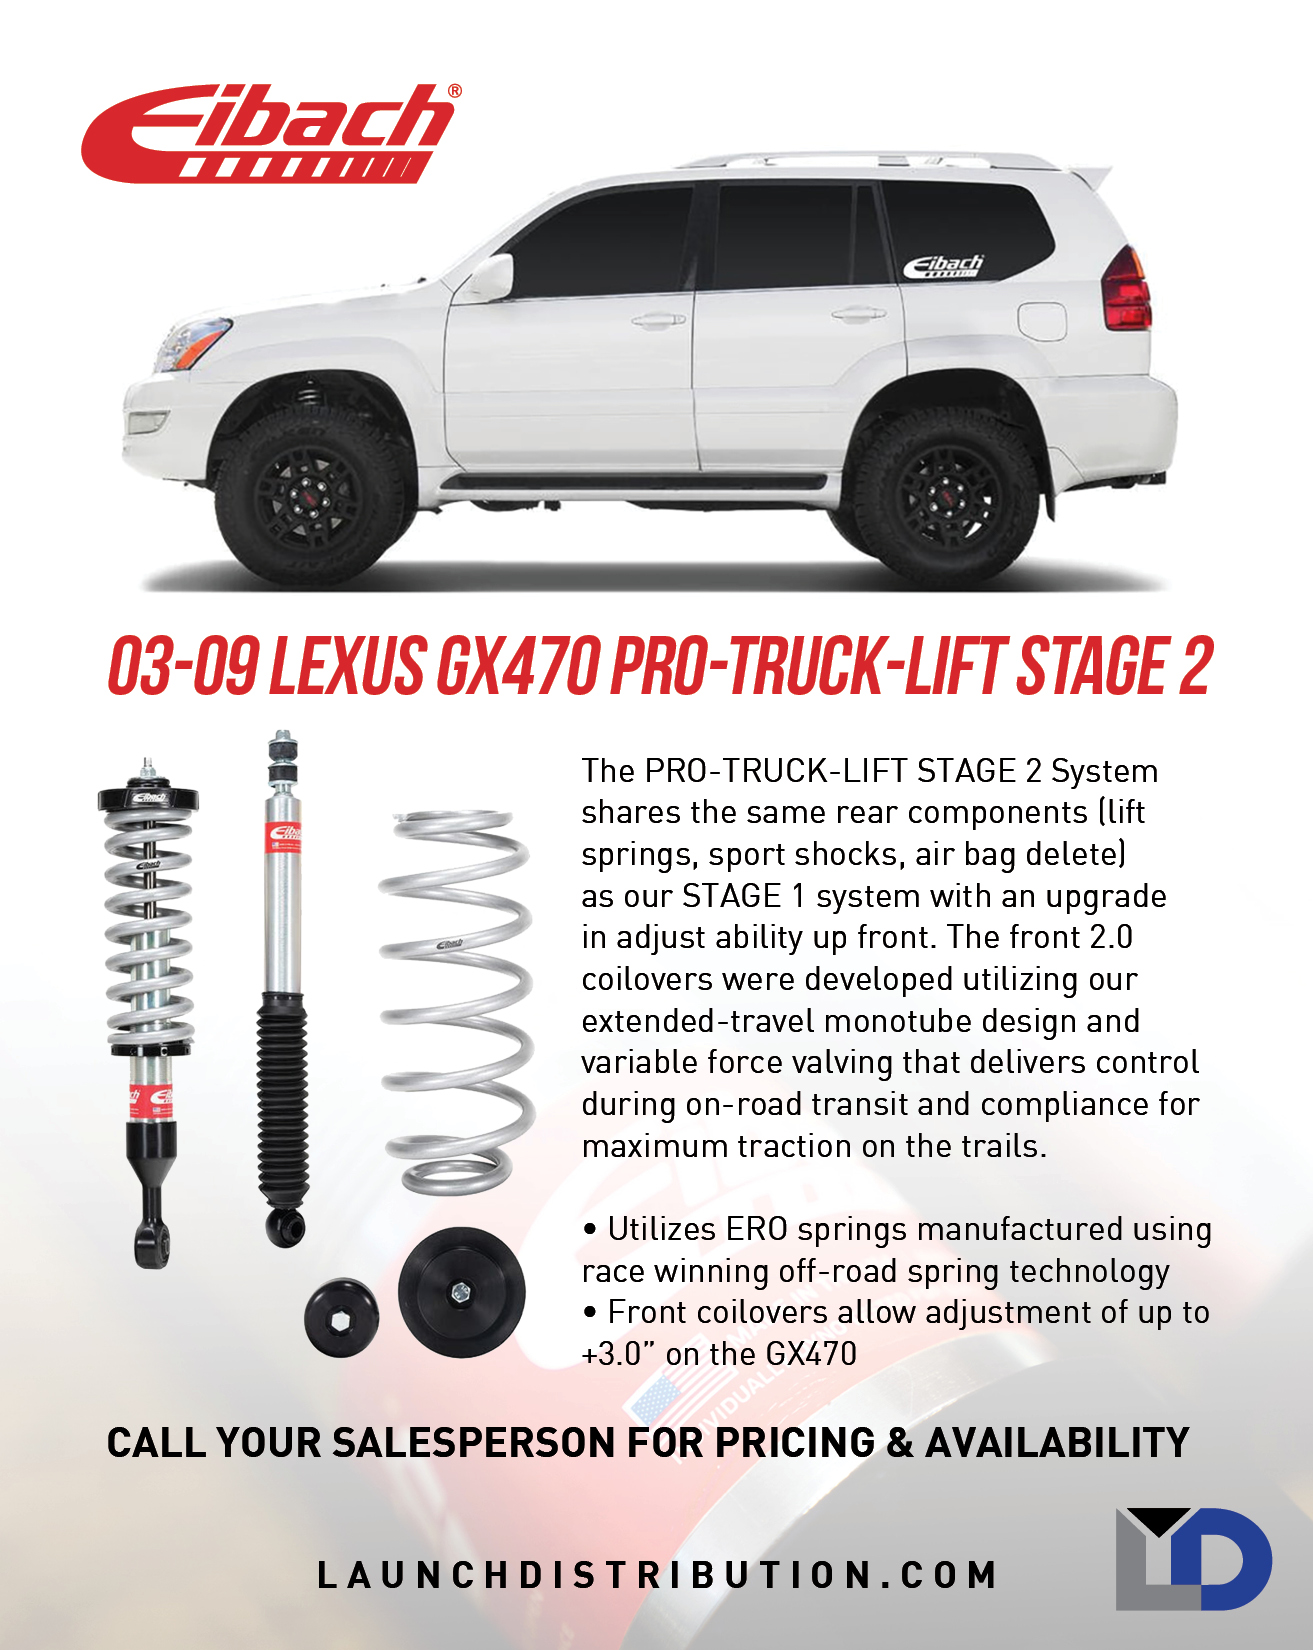 Eibach PRO-TRUCK-LIFT Stage 2 for the Lexus GX470